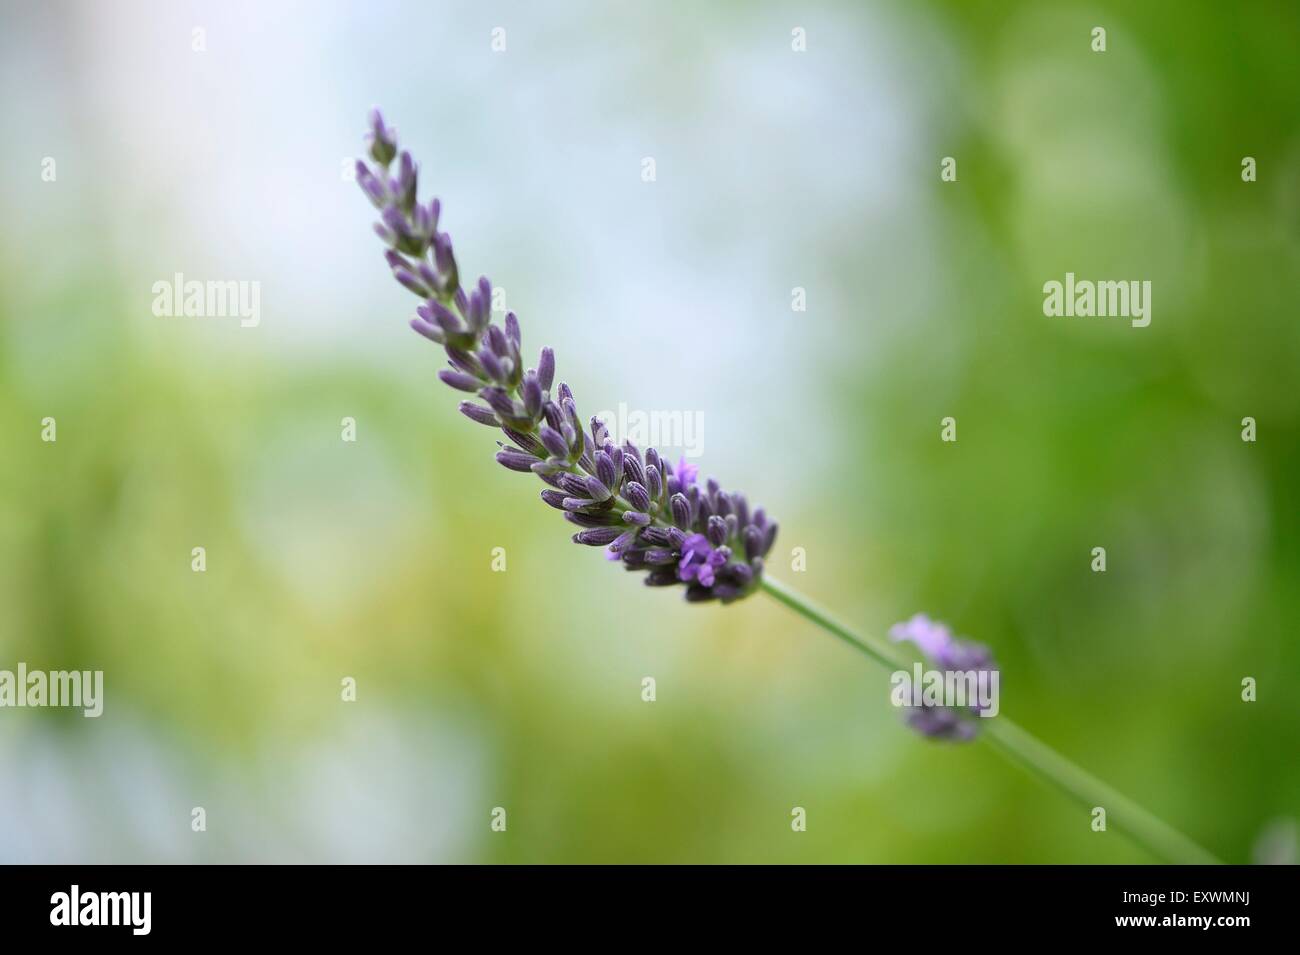 Close-up of a common lavender blossom Stock Photo